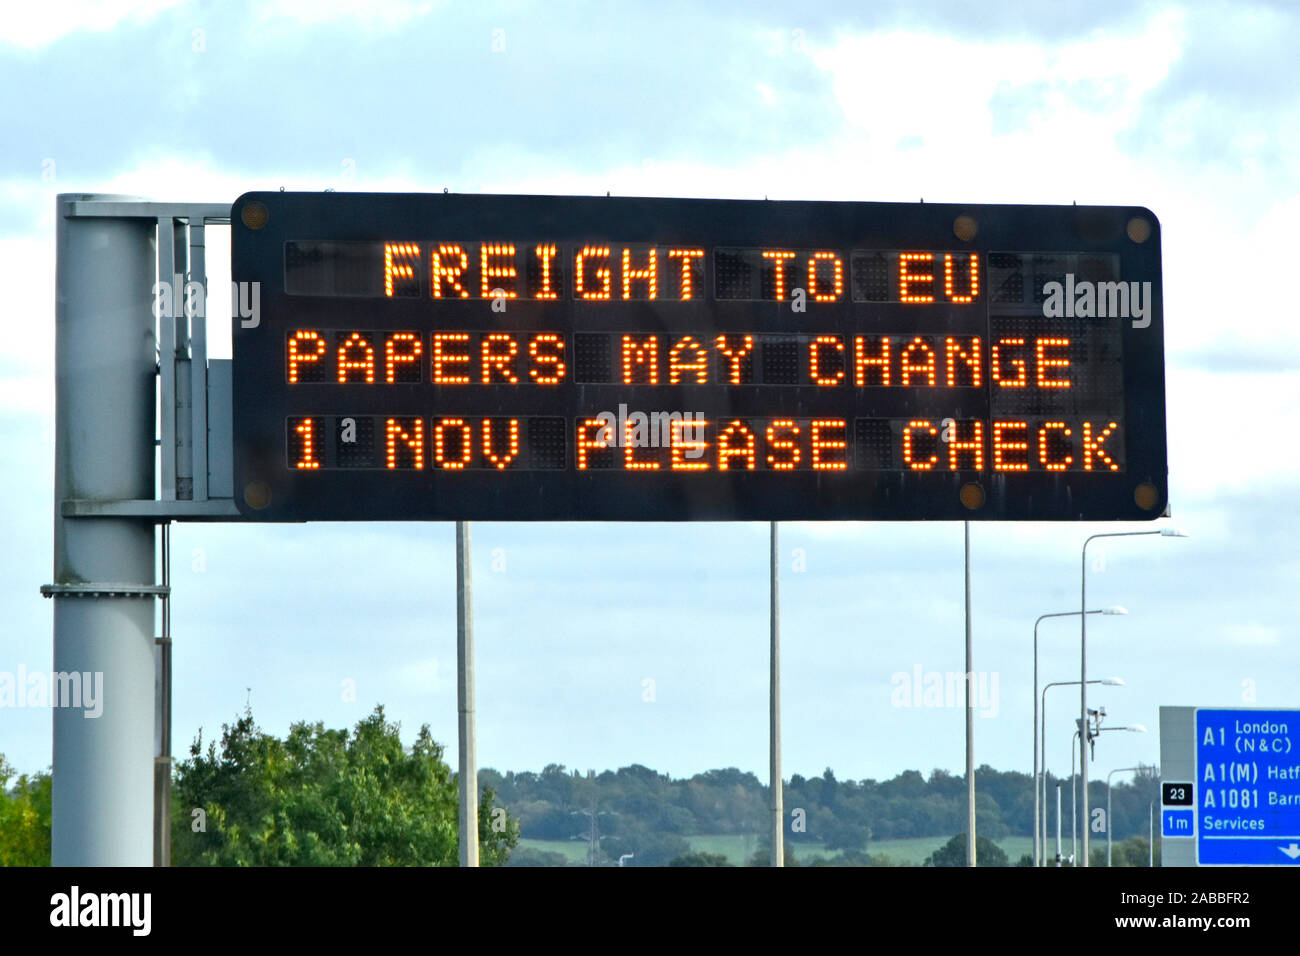 Single panel M25 motorway sign message to freight business lorry truck driver to check EU paperwork ahead of Brexit rules changes London England UK Stock Photo